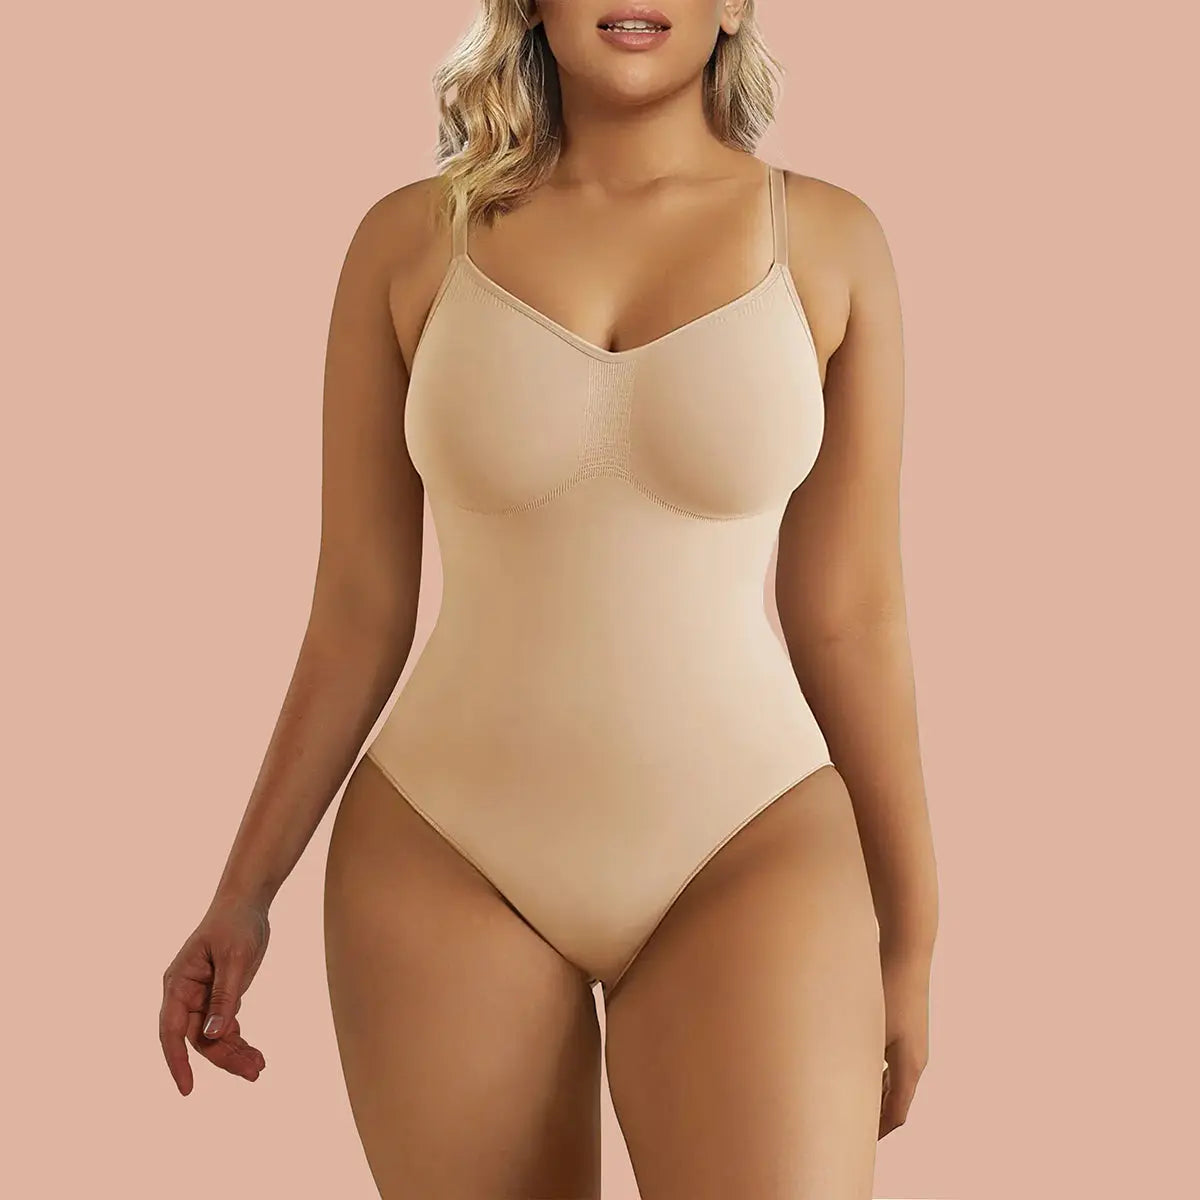 Premium Colombian Shapewear Body Shaper plus size tummy underclothing  Bodysuit Conceals lumps bumps Adjustable Straps Silicone Band Fat reducer  Open bust adjustable straps Camis Sexy-lace Fajas Colom 